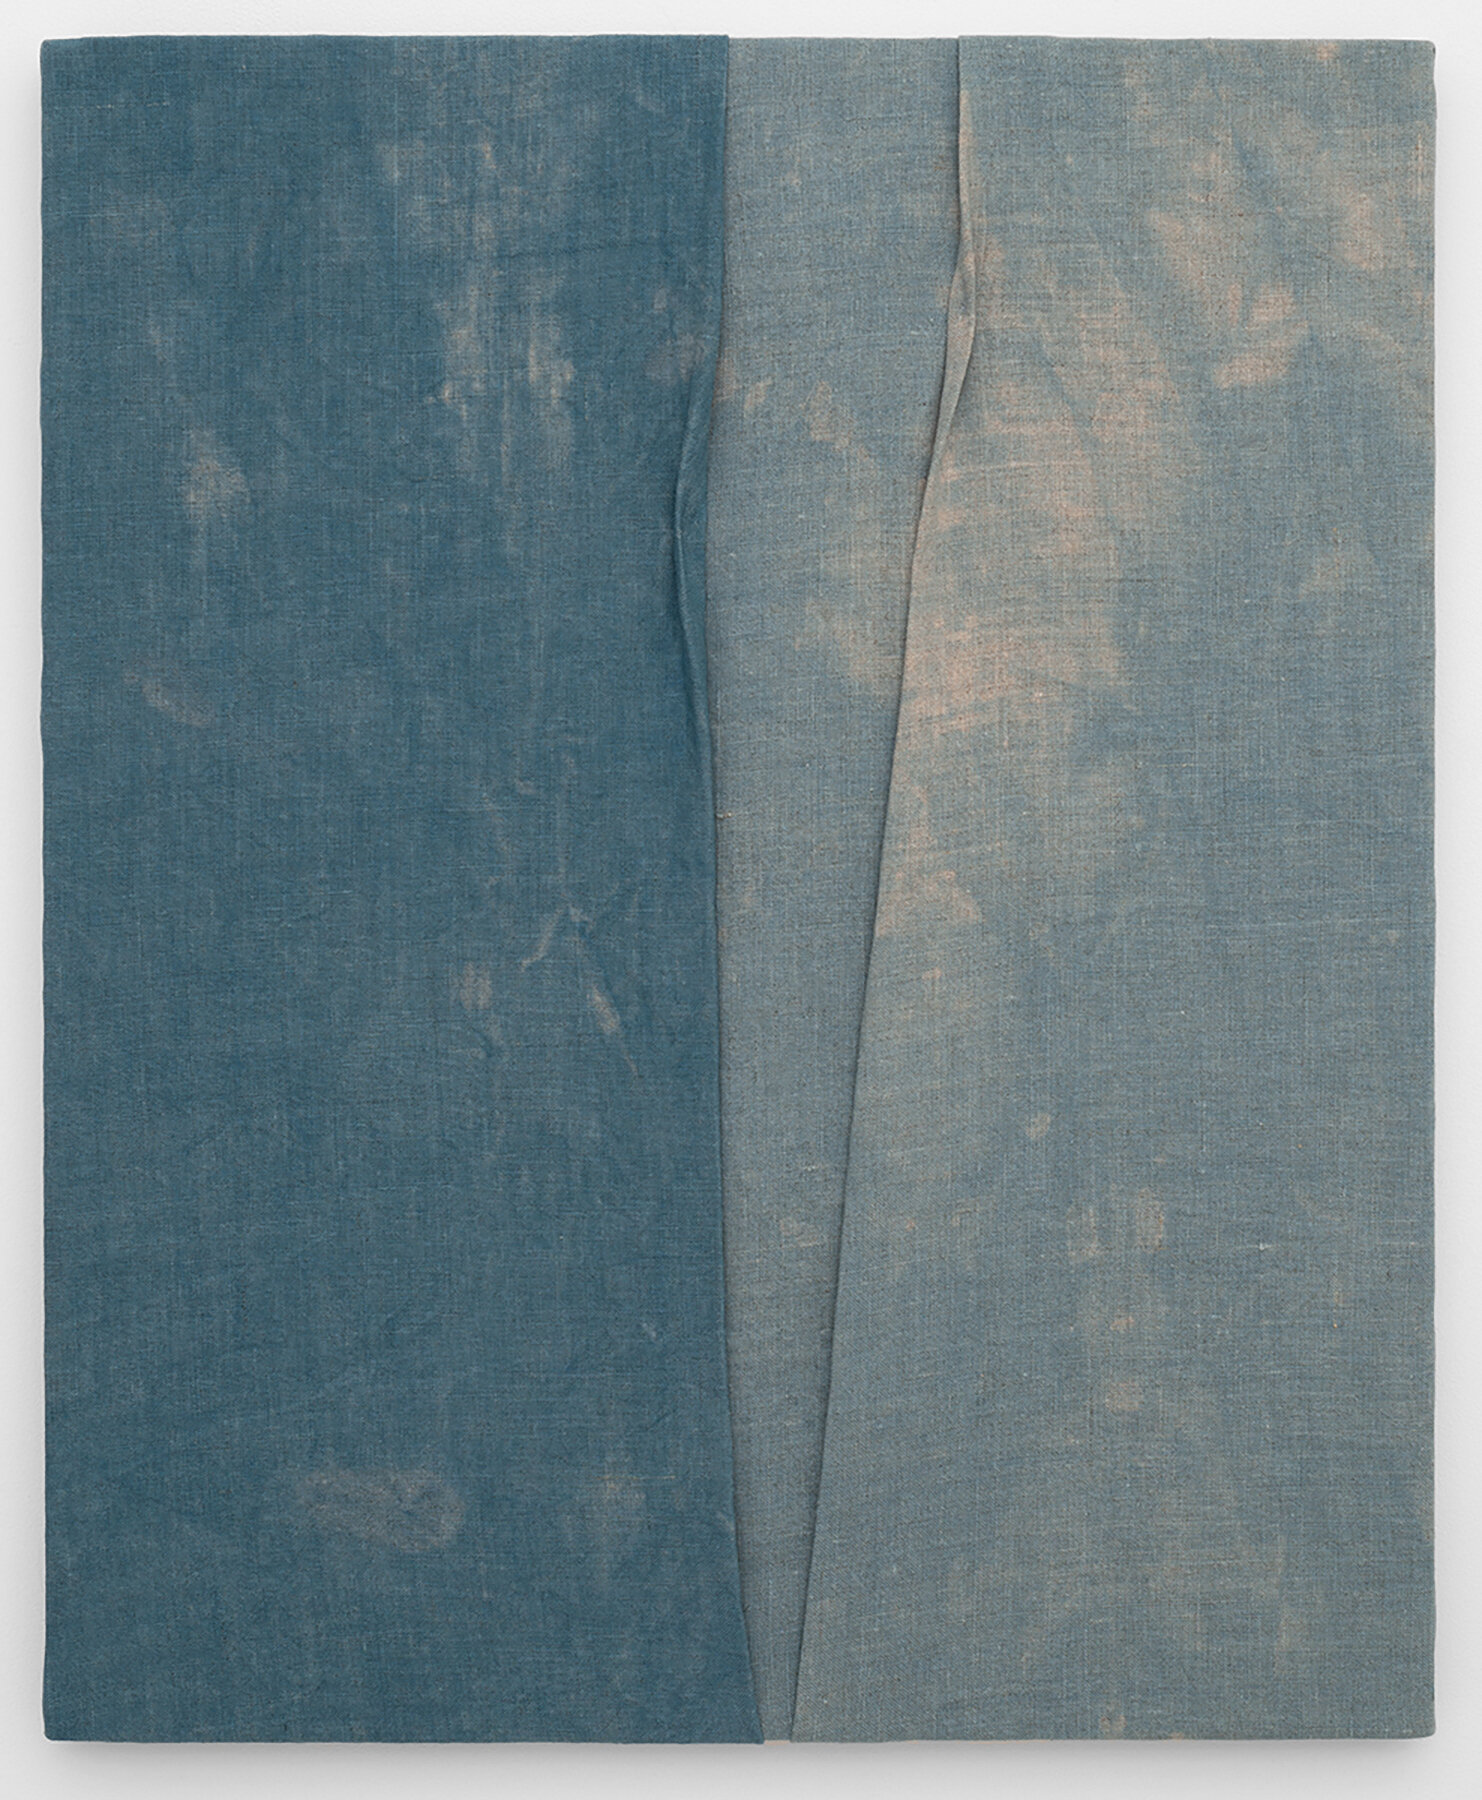   In the Warm Hold , 2021                                                                                               Indigo dyed linen, stitched                                                                                                22 x 18